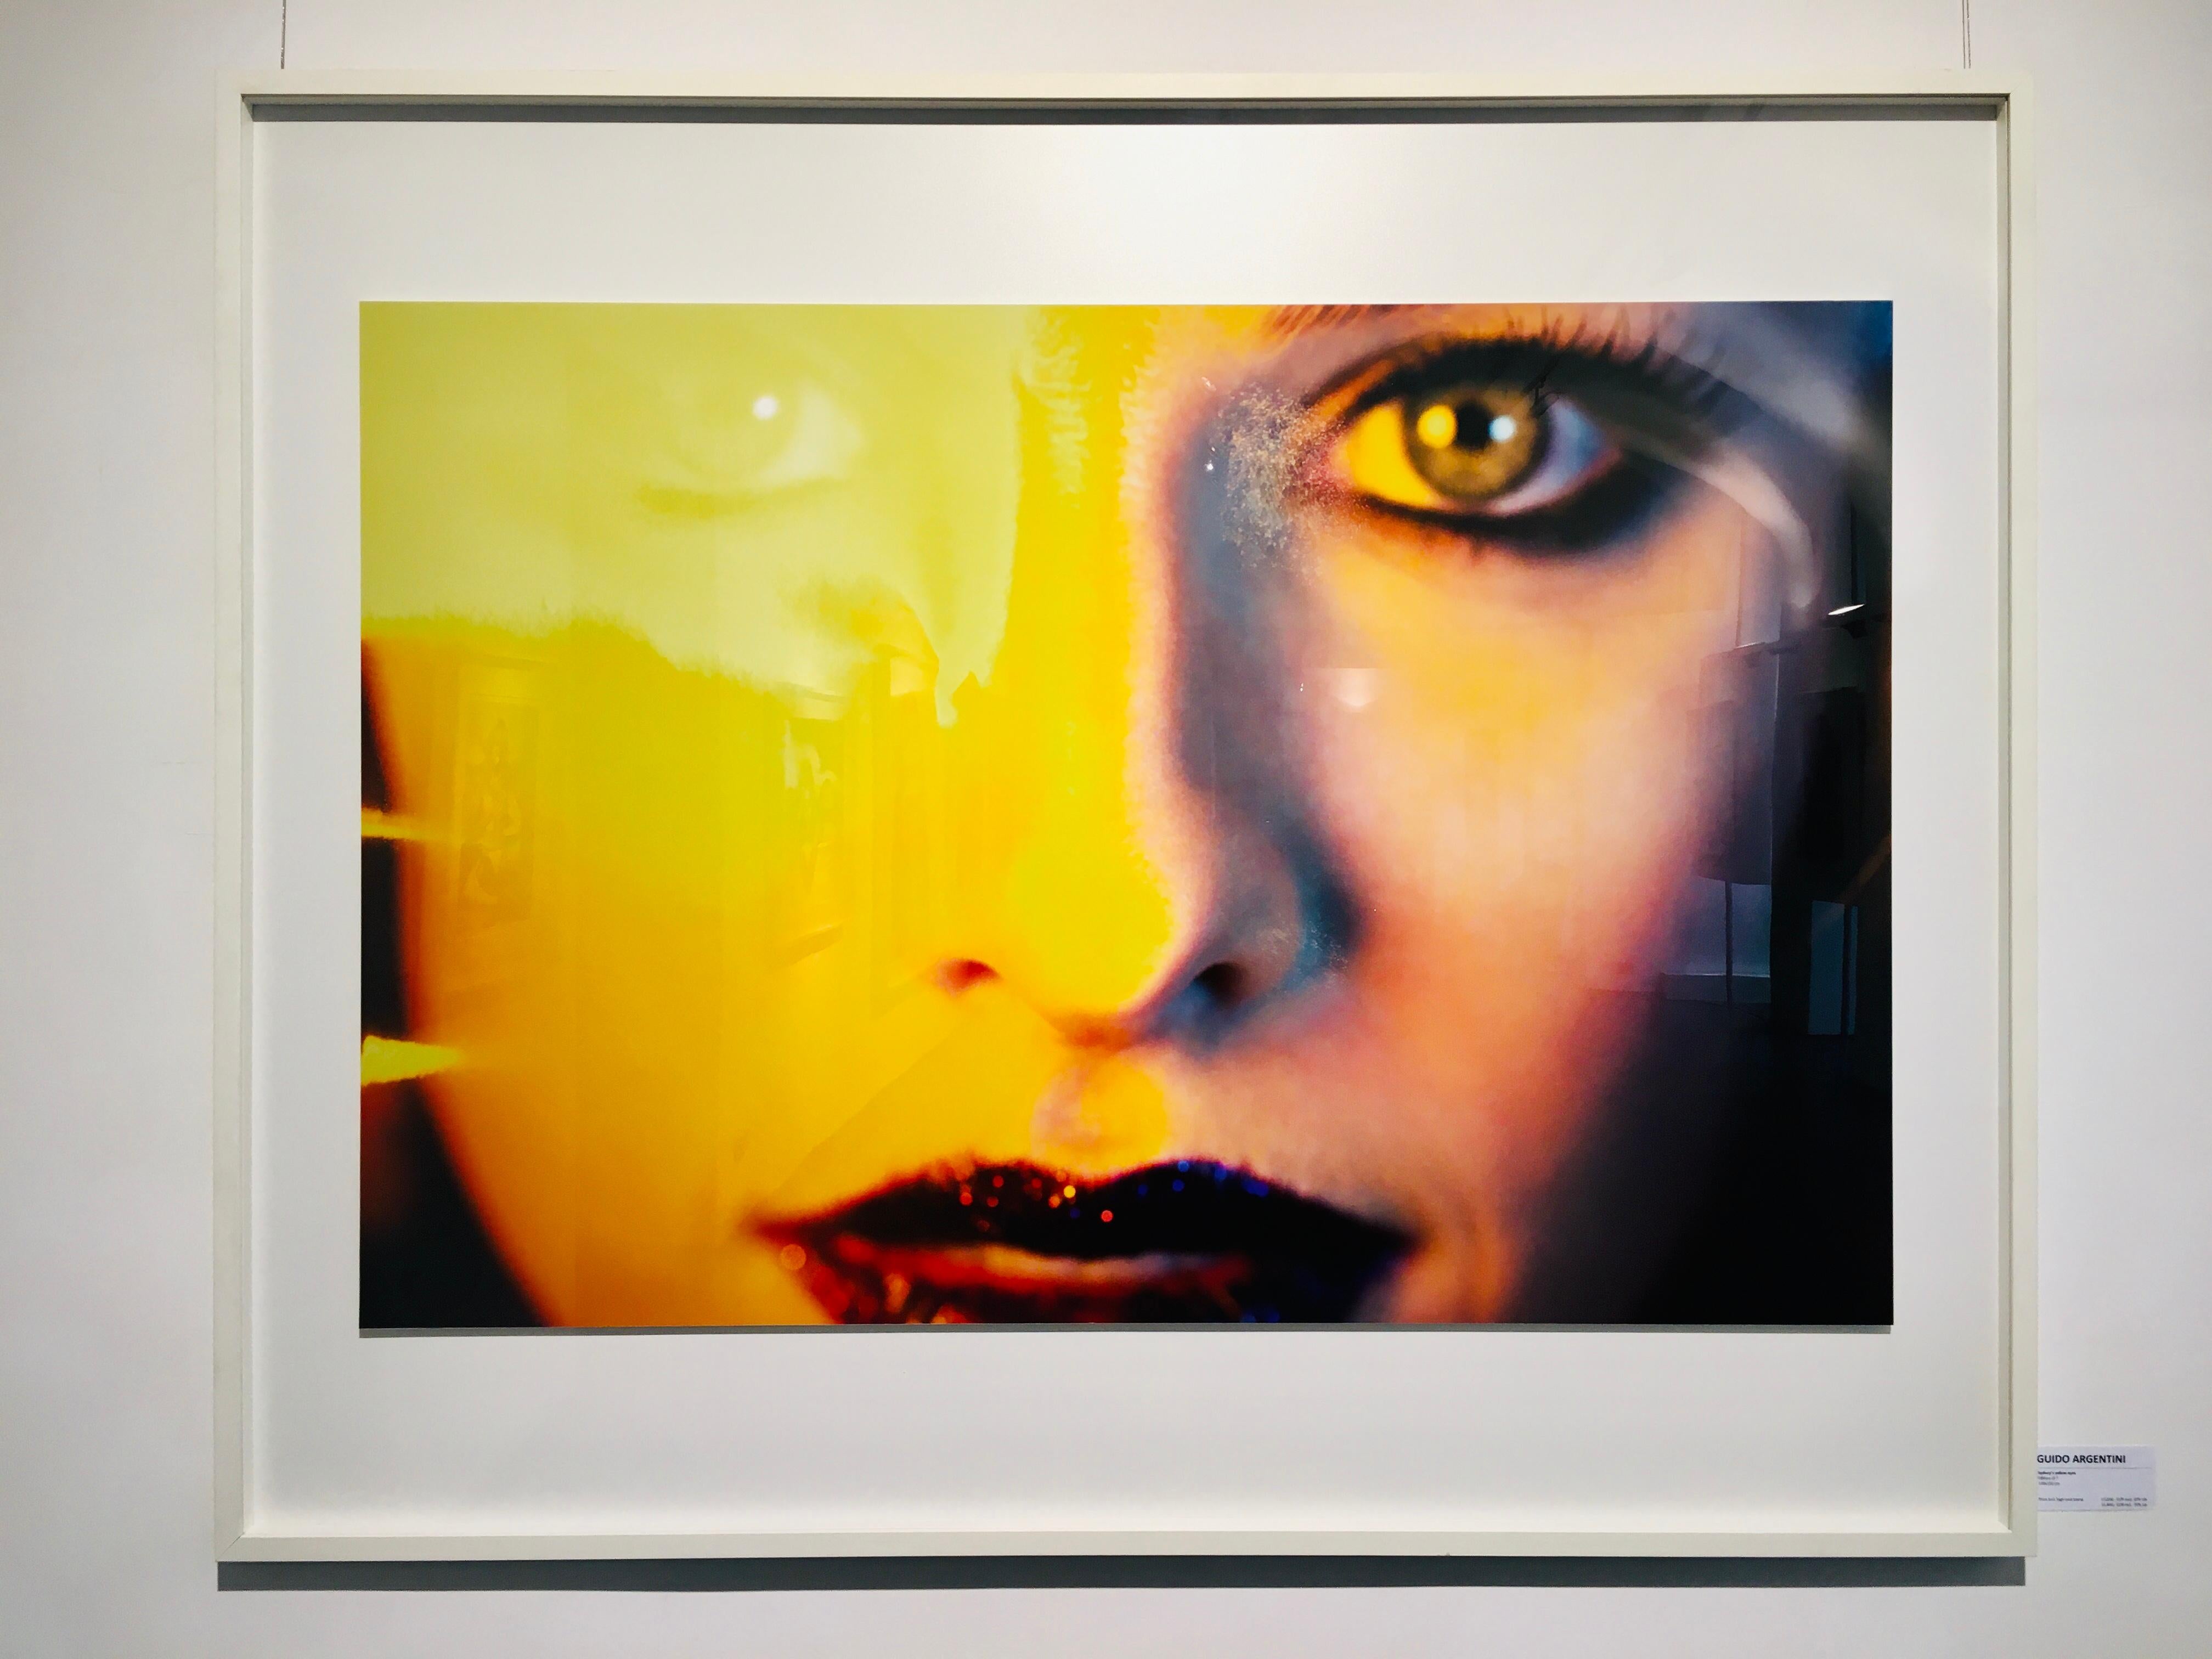 Guido Argentini Portrait Photograph - Sydney's yellow eyes - portrait of the face of a beautiful woman